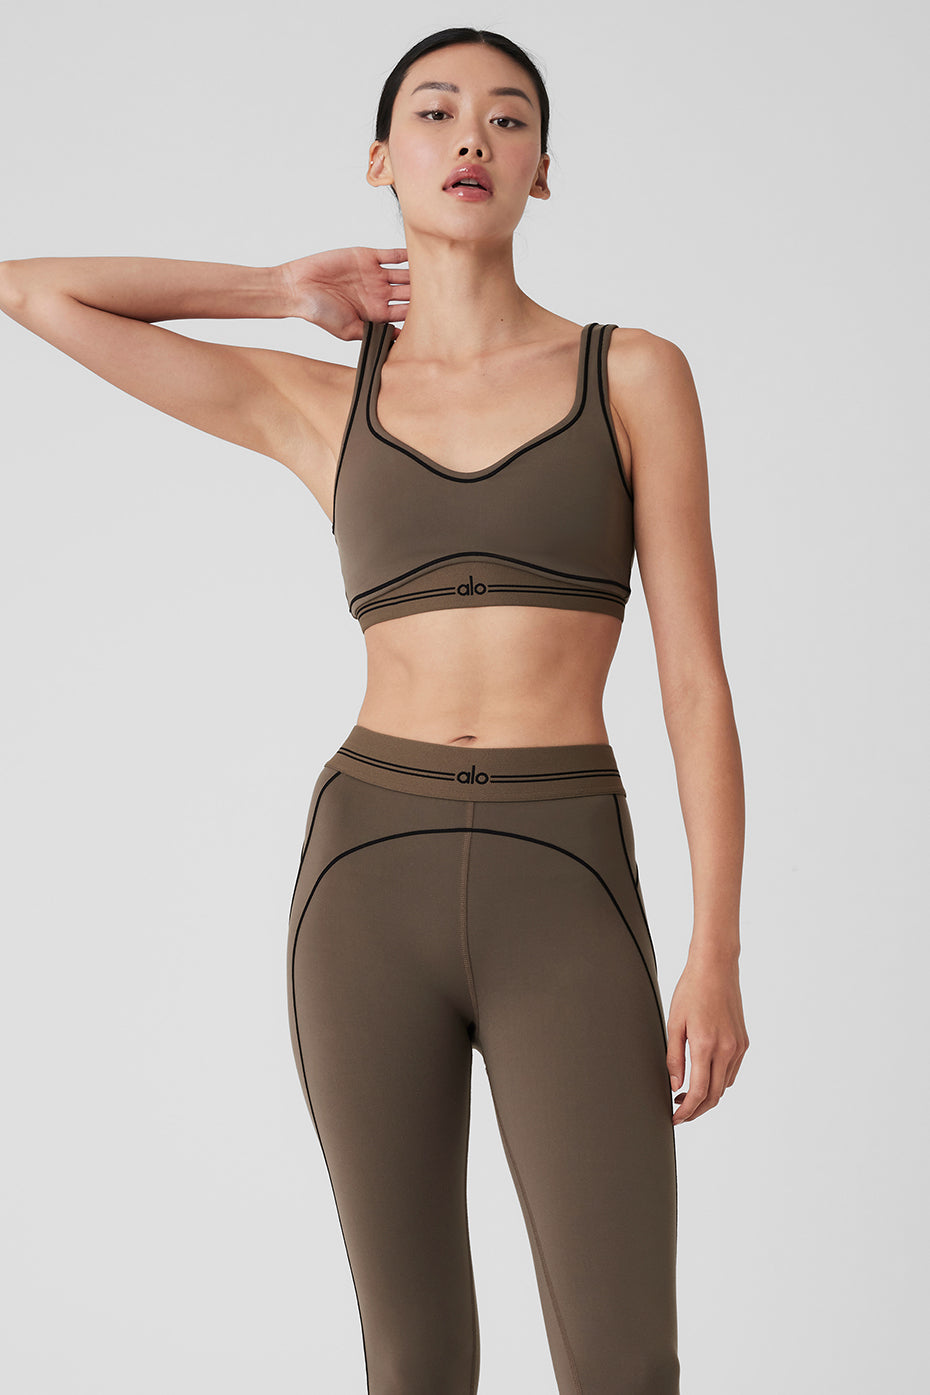 Alo Yoga - Falling for our latest Dark Olive haul 🖤 This new